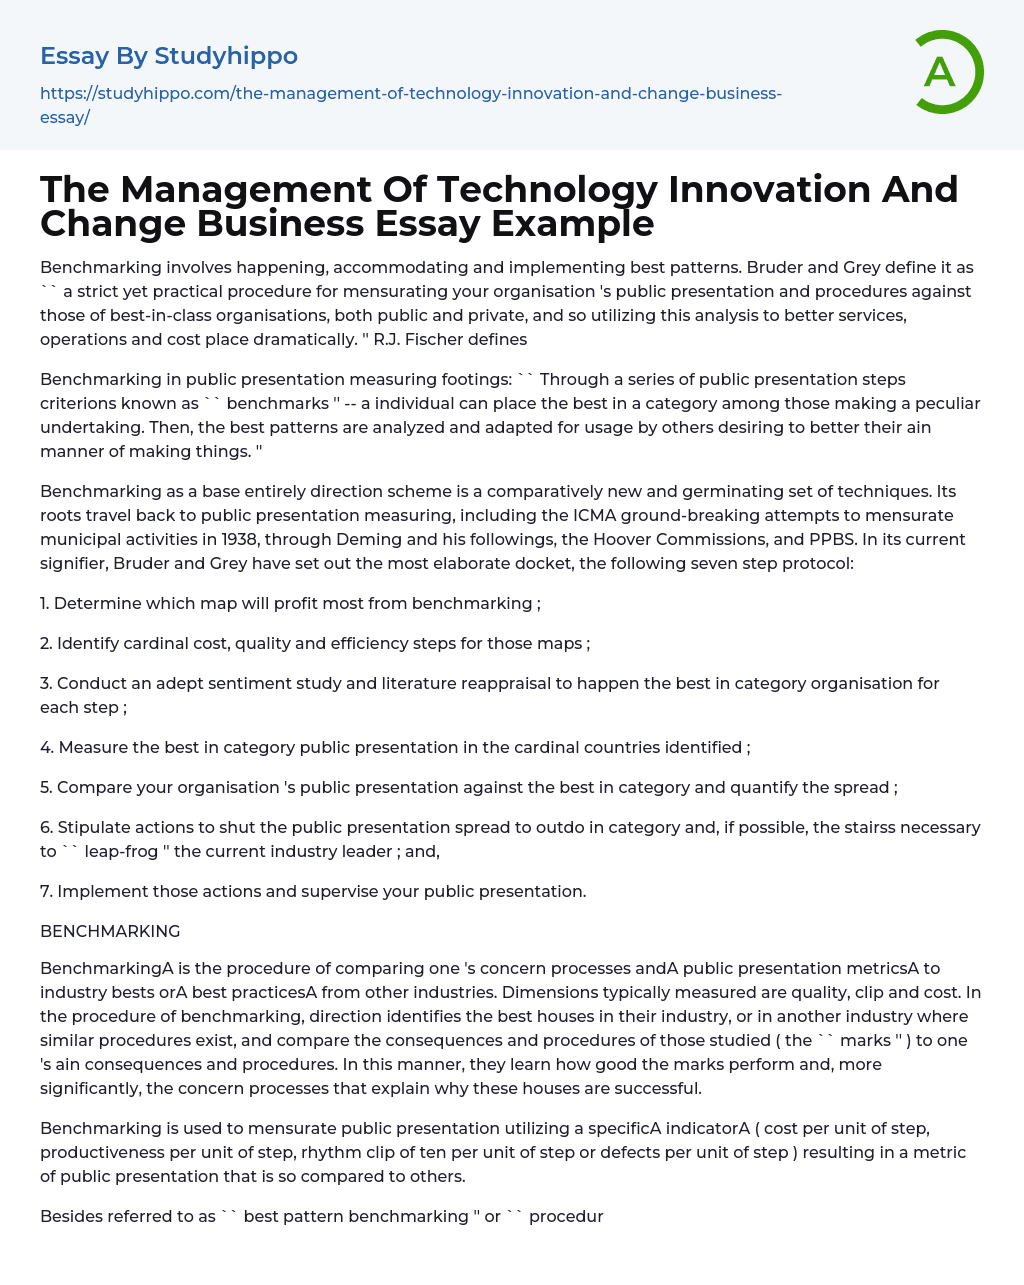 The Management Of Technology Innovation And Change Business Essay Example